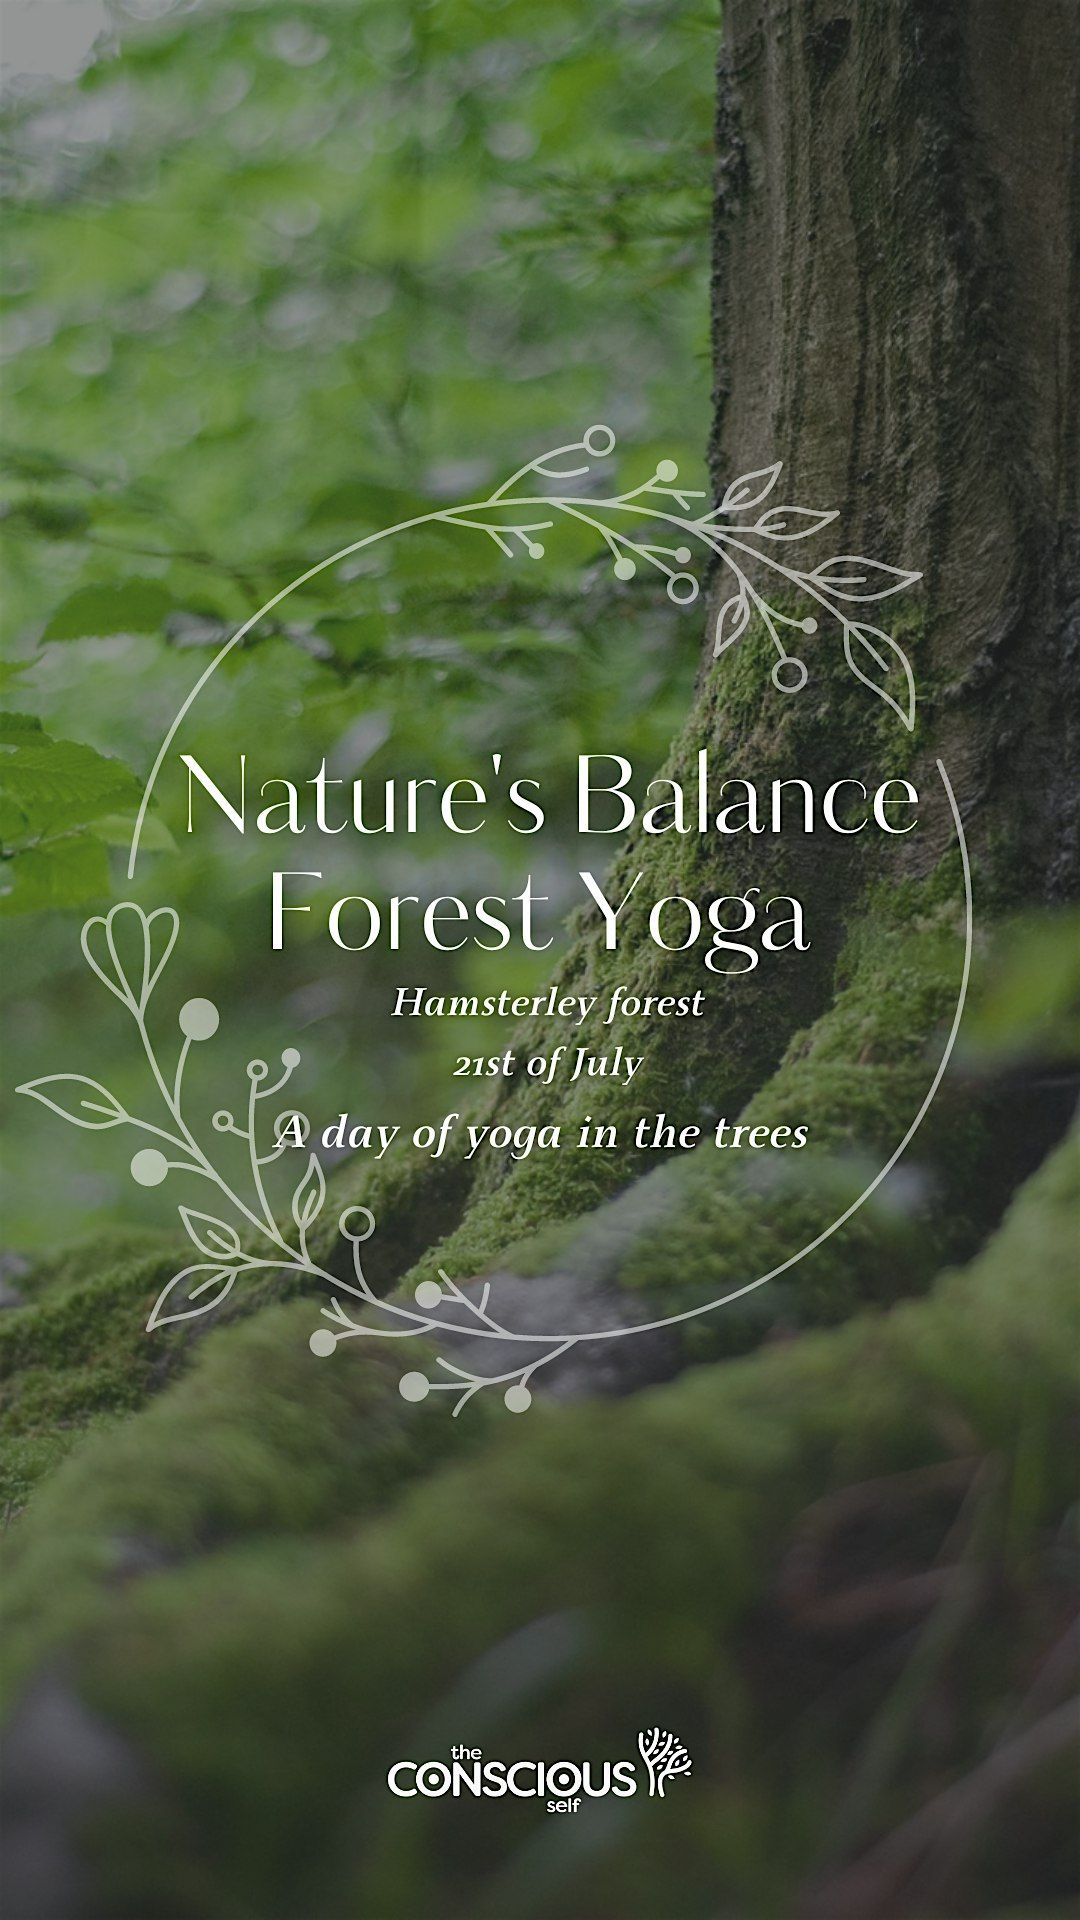 Nature's Balance a day of yoga in nature - 21st of July